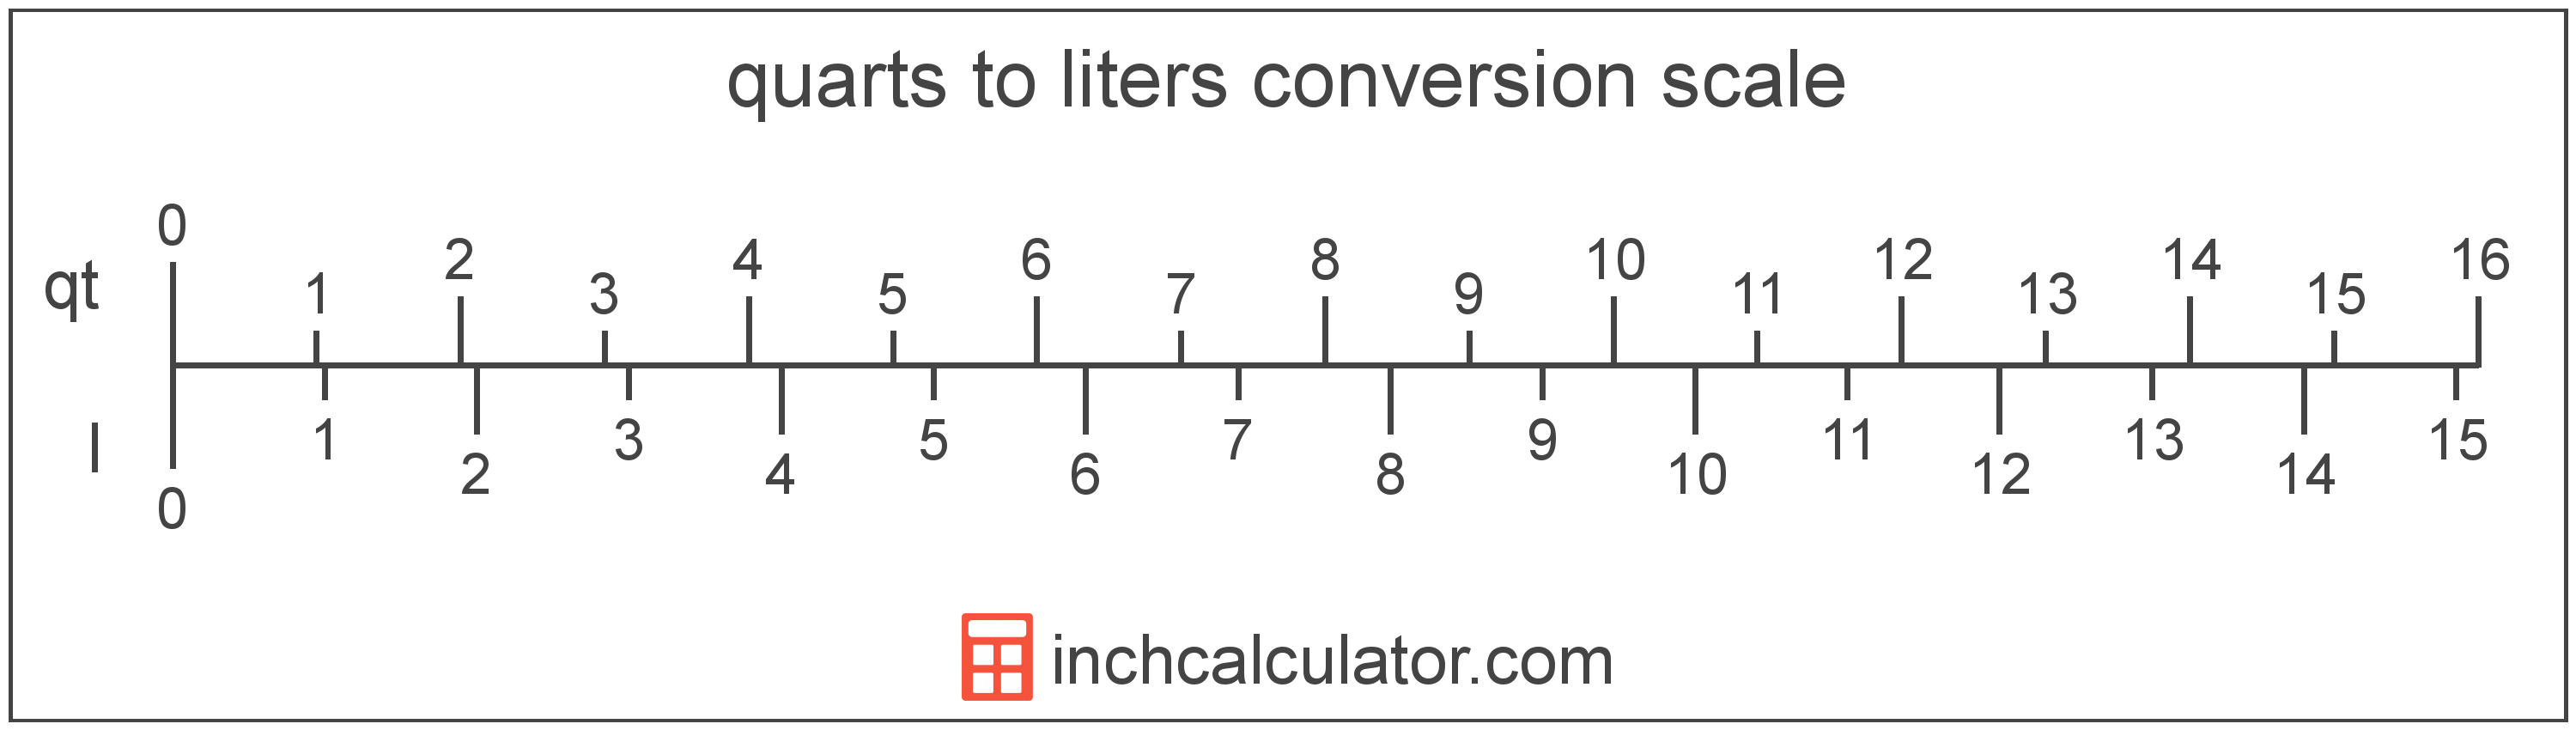 conversion scale showing quarts and equivalent liters volume values